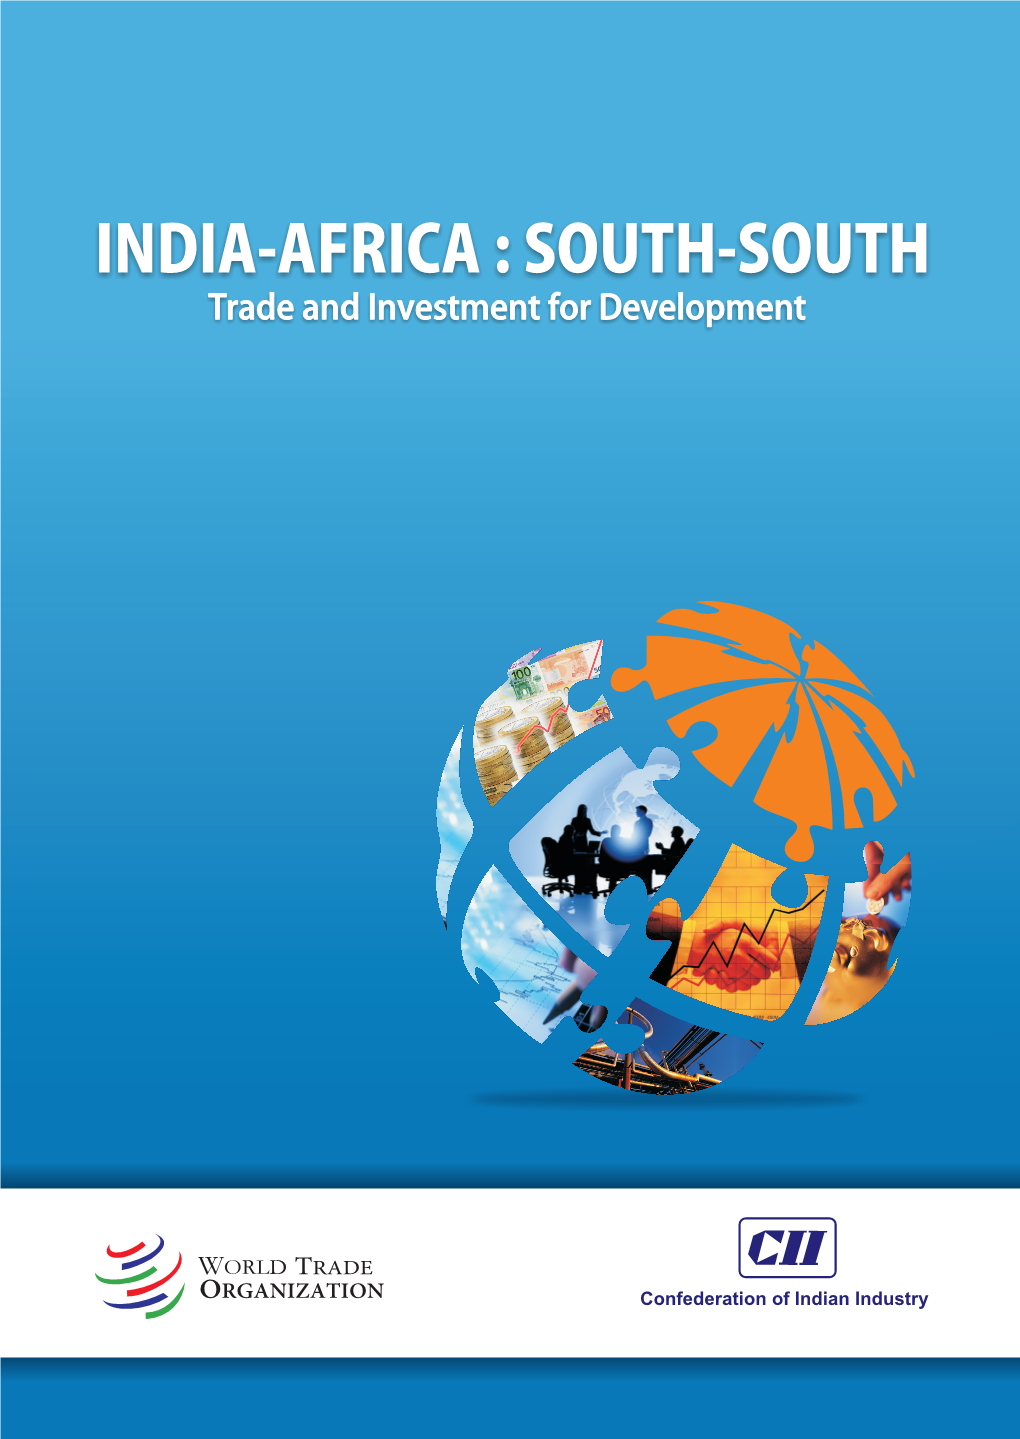 India-Africa Trade Has Grown by Nearly 32% Annually Between 2005 and 2011, for Industry Through a Range of Specialized Services and Strategic Global Linkages